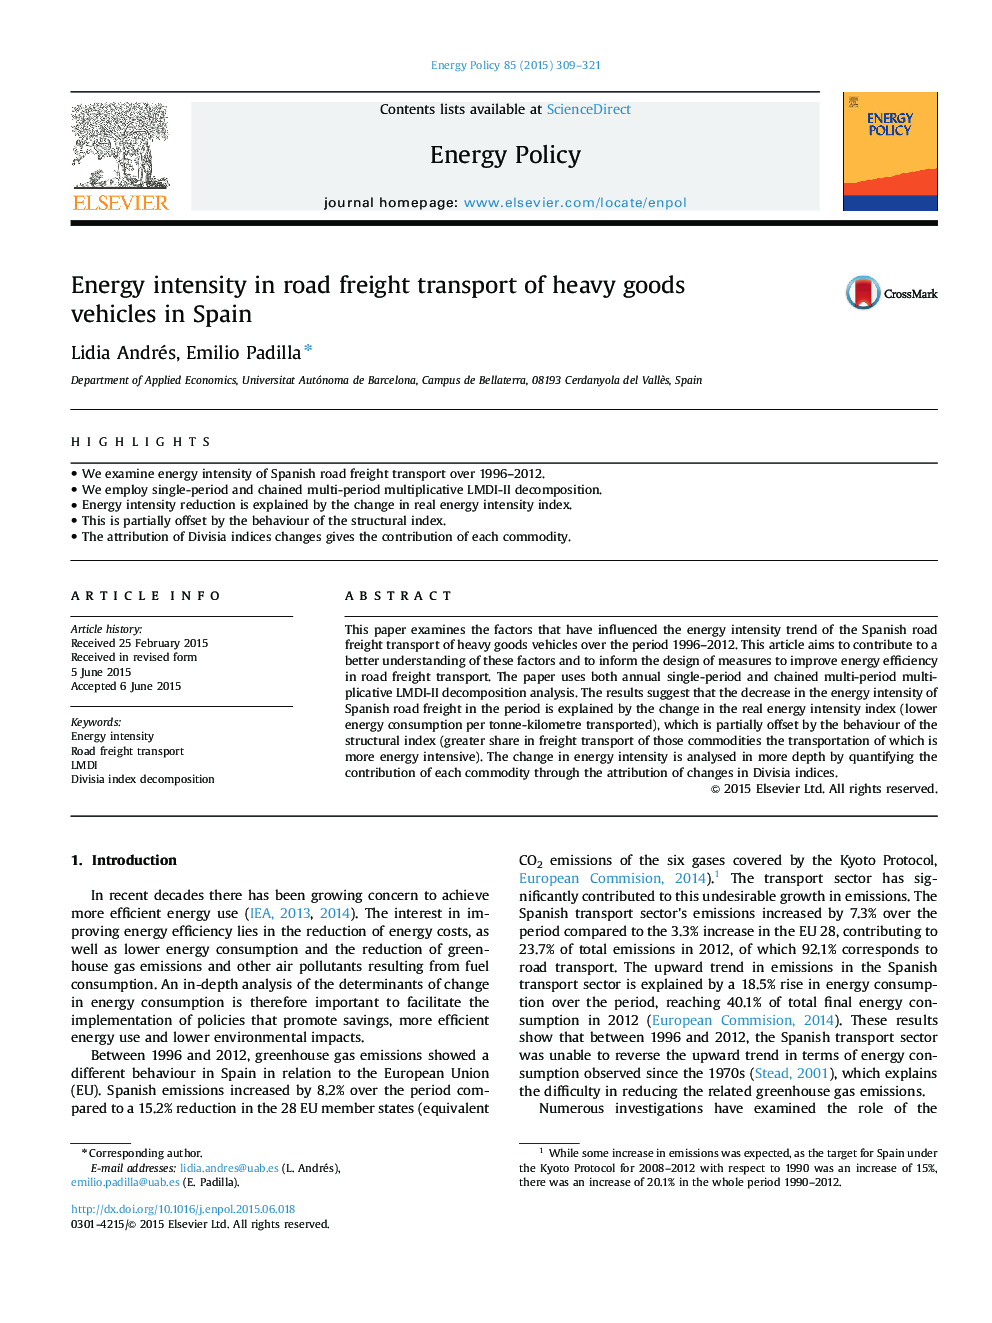 Energy intensity in road freight transport of heavy goods vehicles in Spain